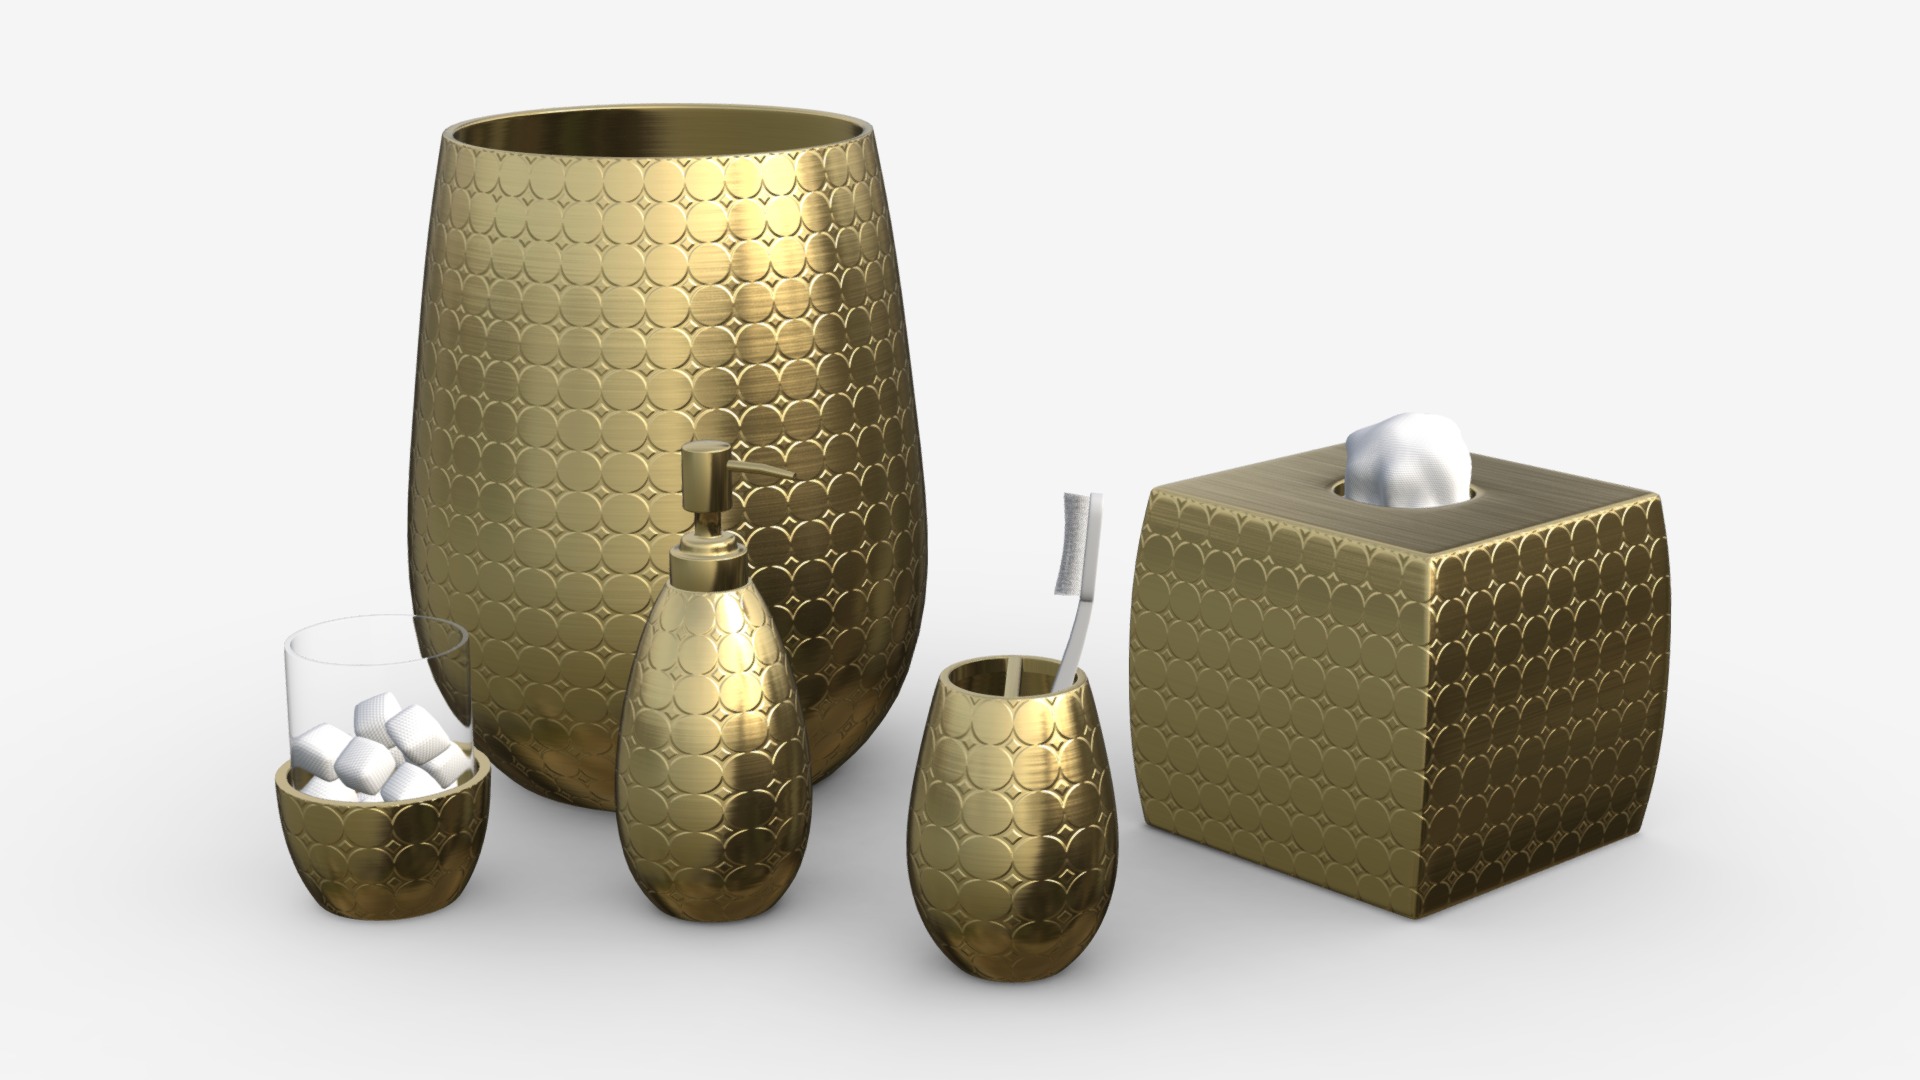 3D model Pina Colada Gold Pineapple Bath Accessories - This is a 3D model of the Pina Colada Gold Pineapple Bath Accessories. The 3D model is about a group of objects next to each other.